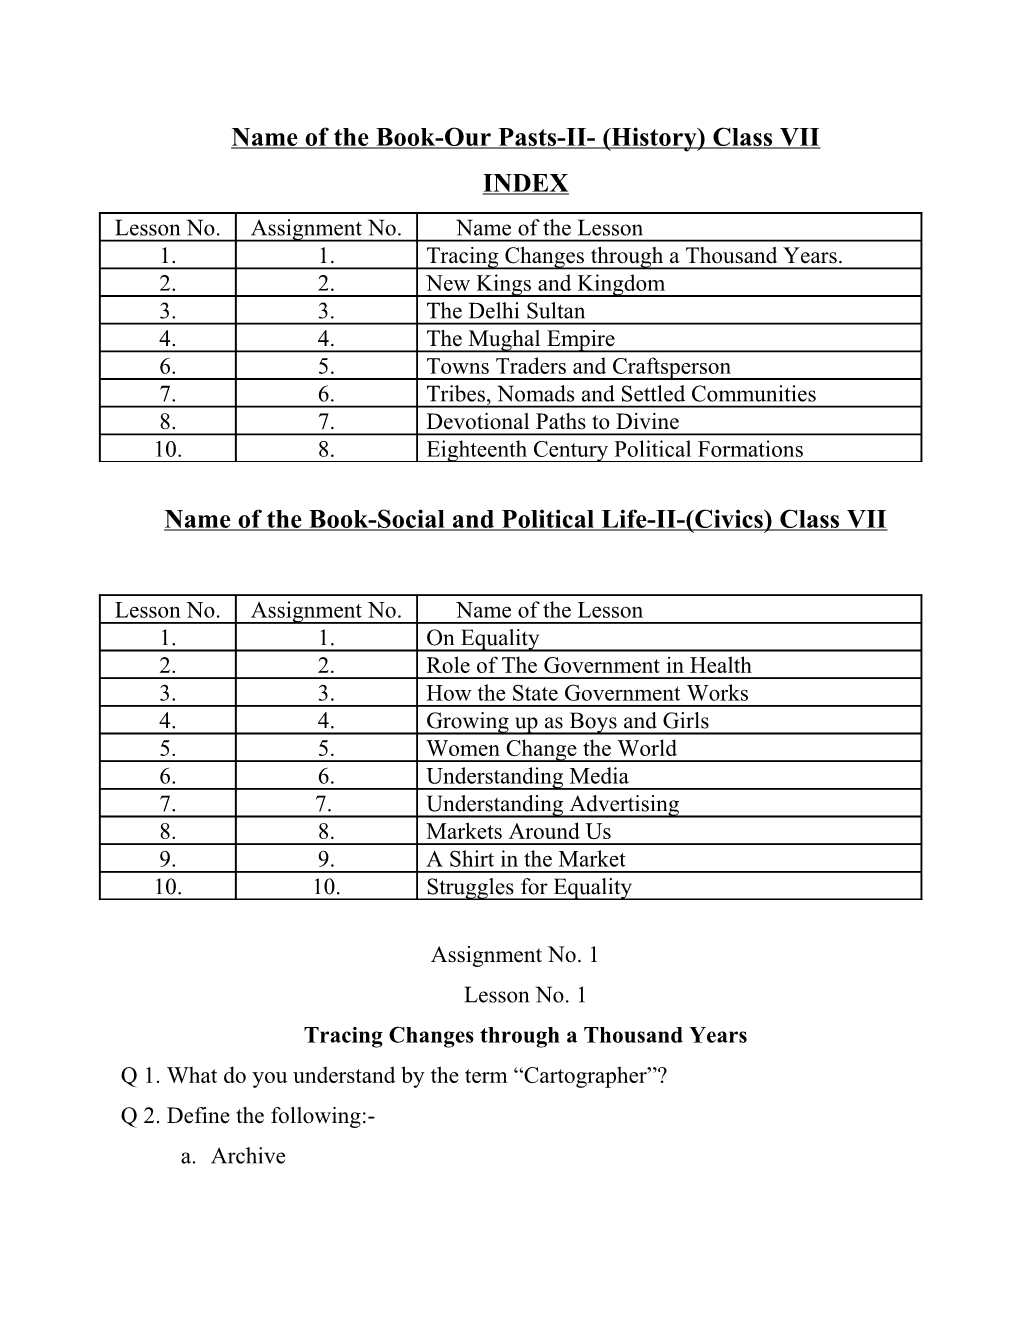 Name of the Book-Our Pasts-II-(History) Class VII